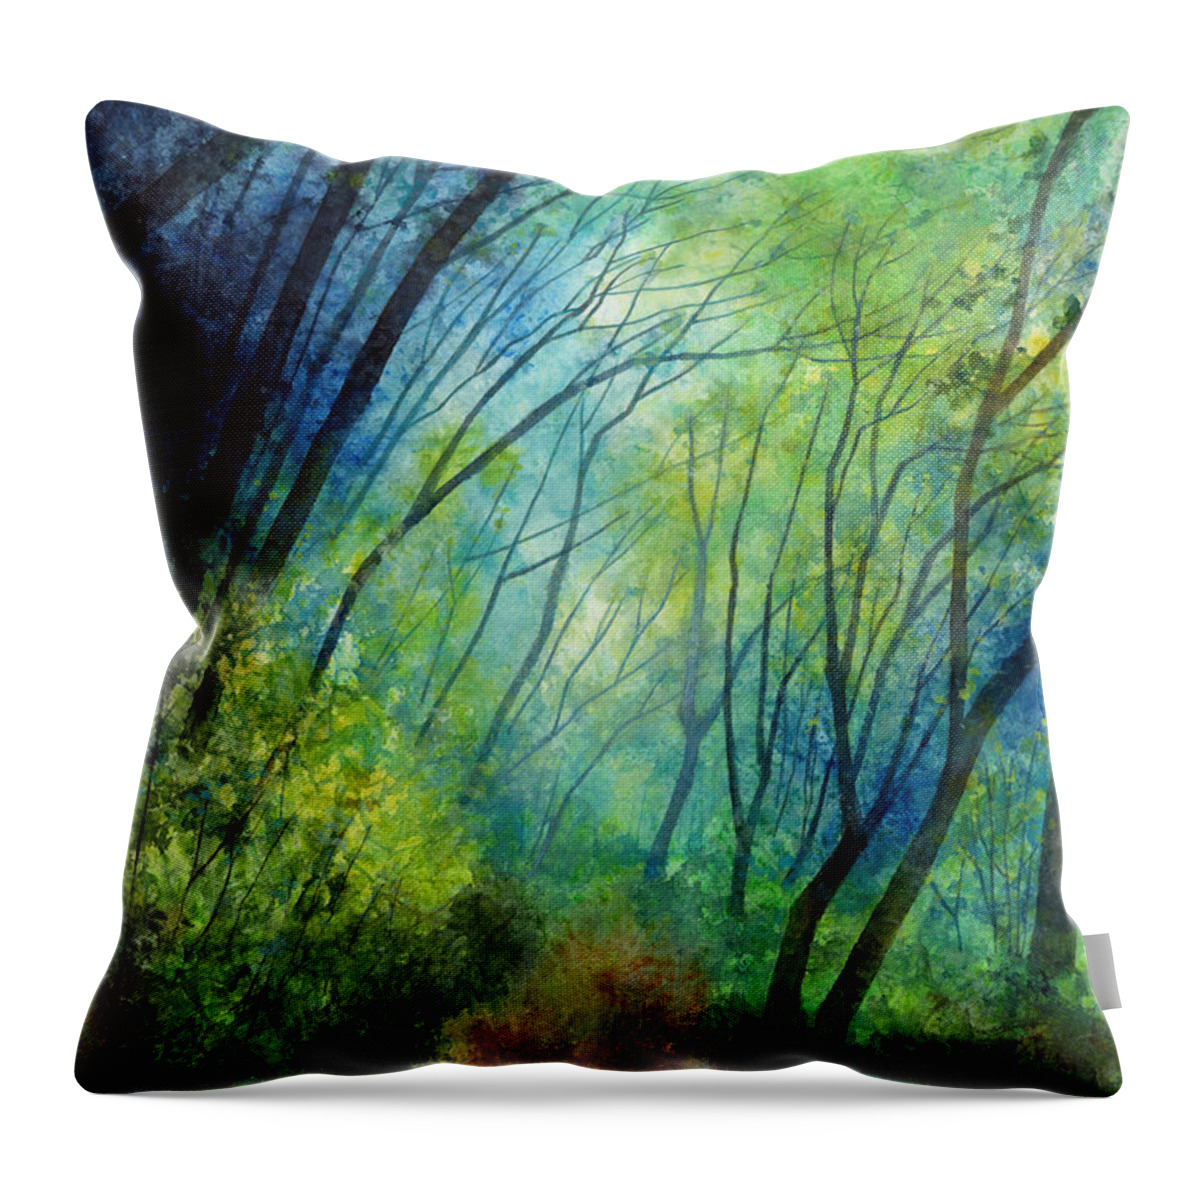 Blue Throw Pillow featuring the painting Blue Fog by Hailey E Herrera